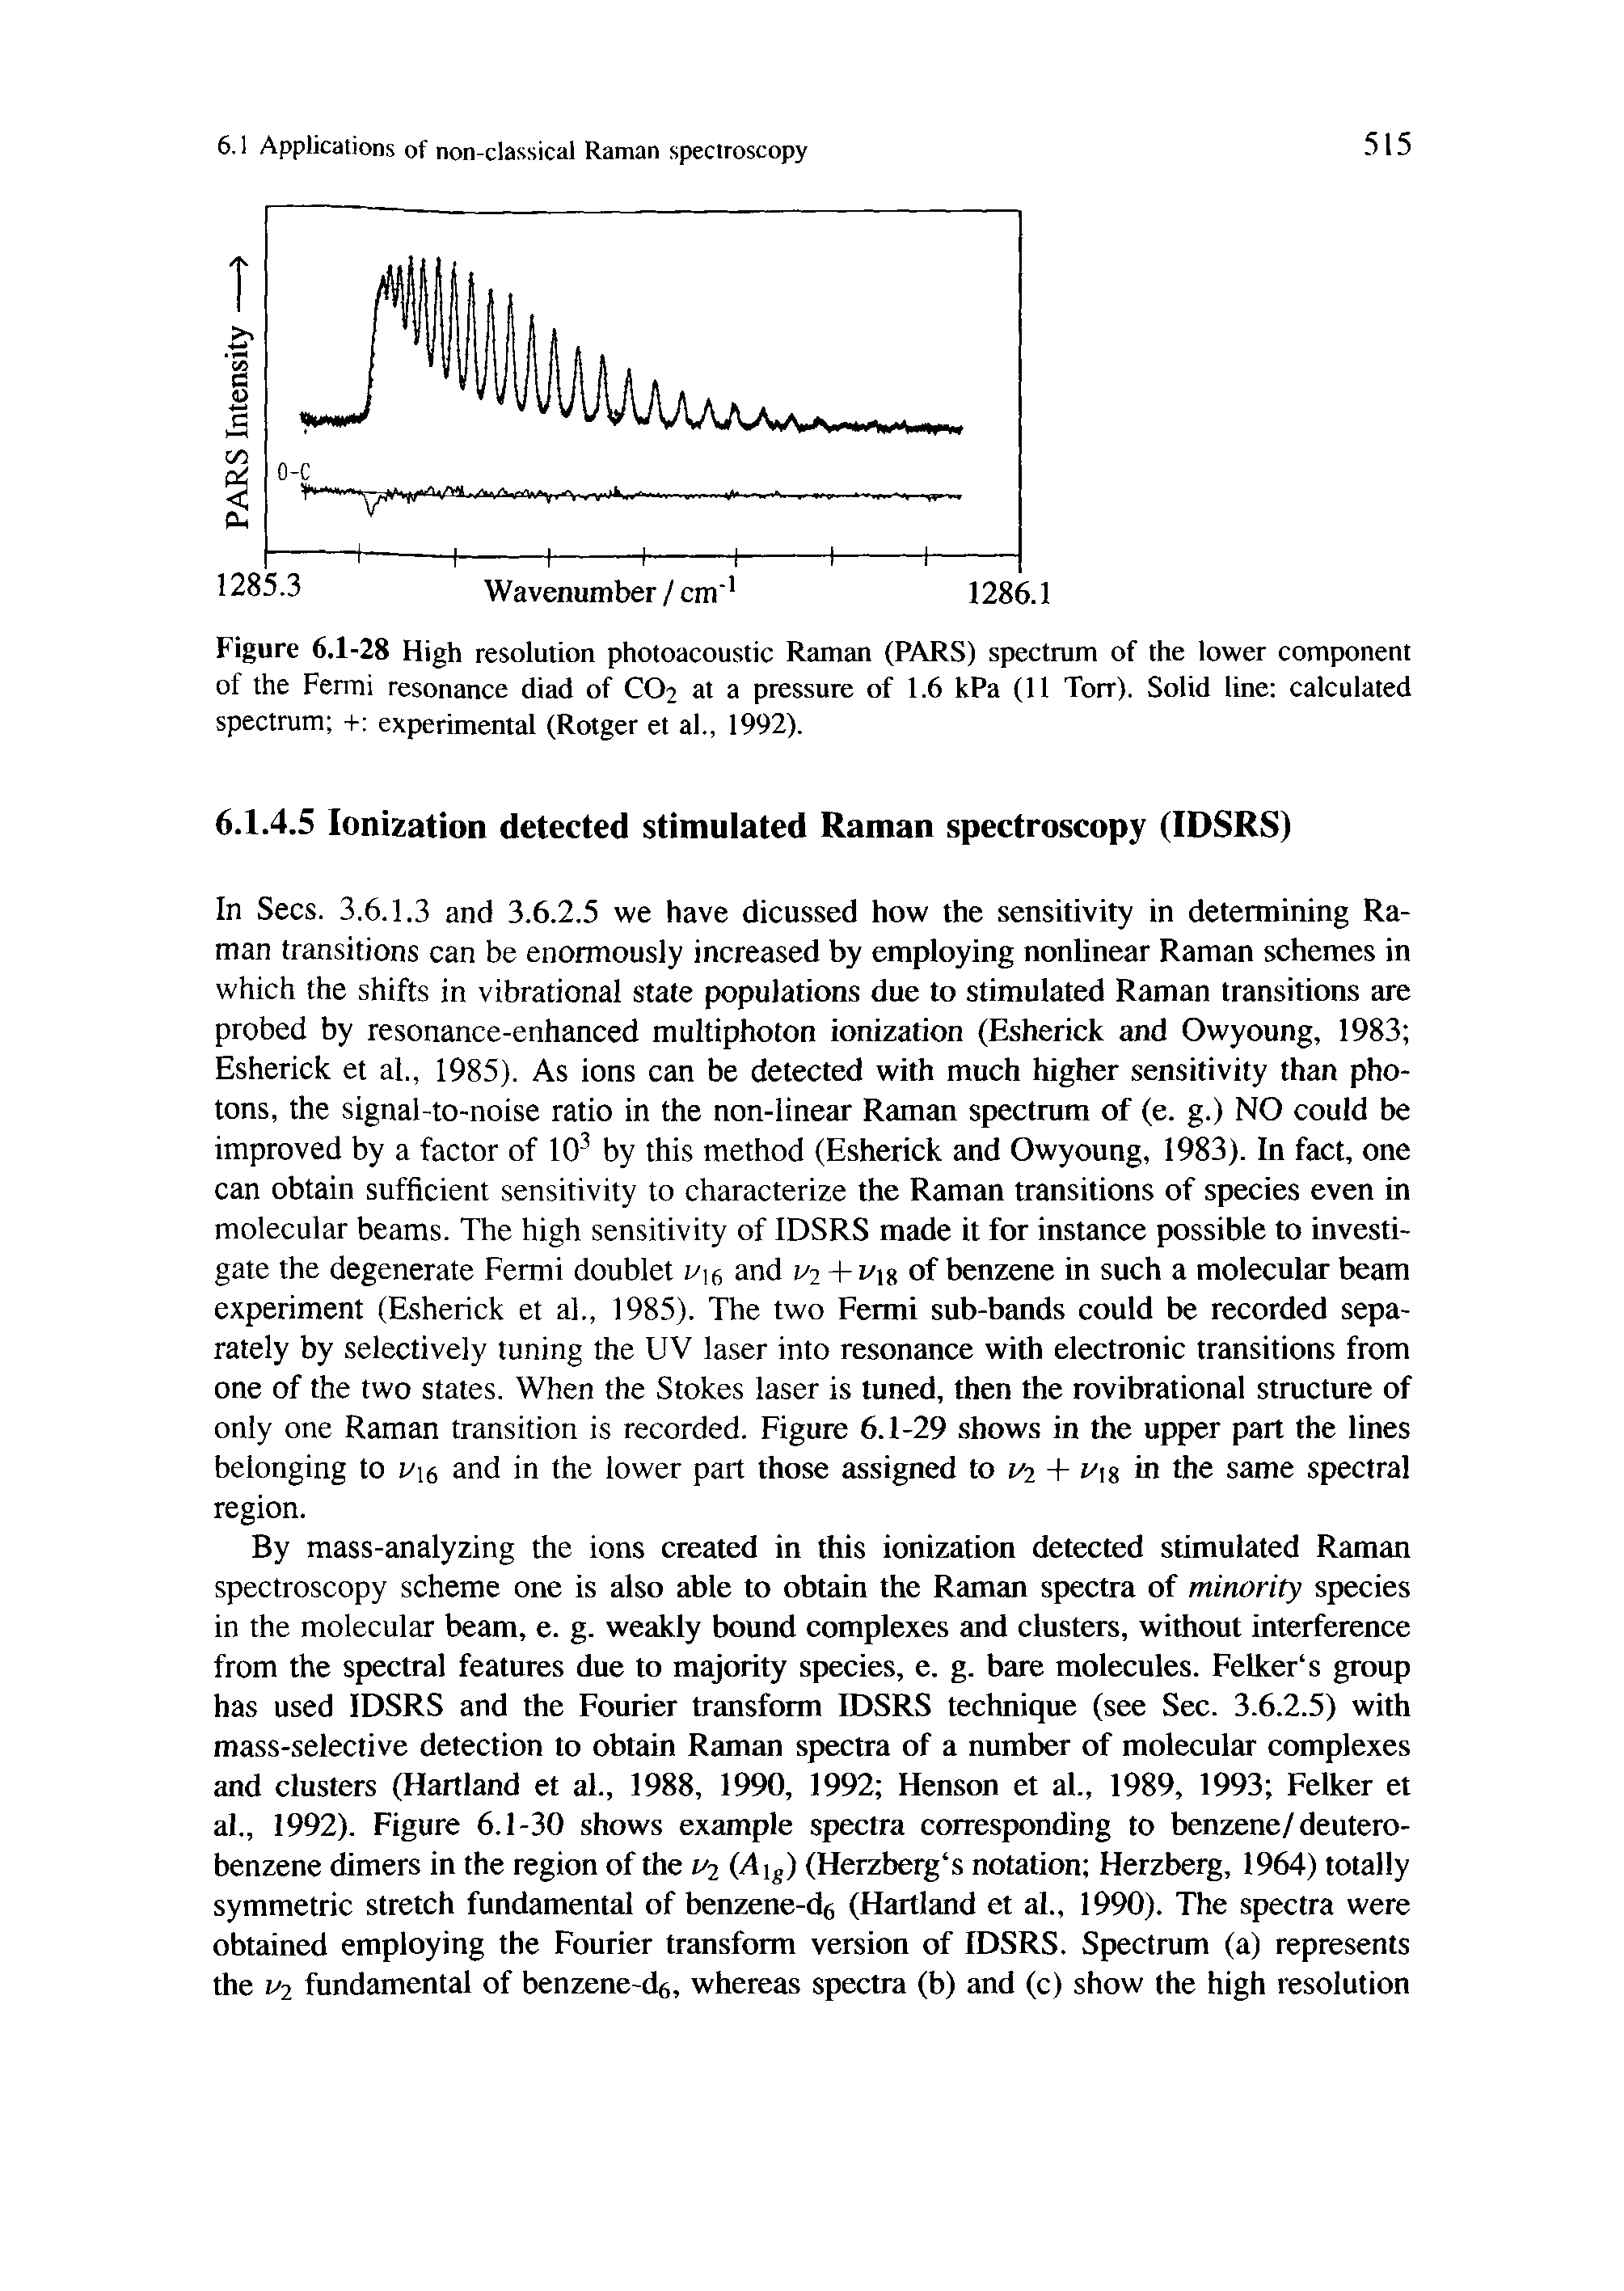 Figure 6.1-28 High resolution photoacoustic Raman (PARS) spectrum of the lower component of the Fermi resonance diad of CO2 at a pressure of 1.6 kPa (11 Torr). Solid line calculated spectrum -1- experimental (Rotger et al., 1992).